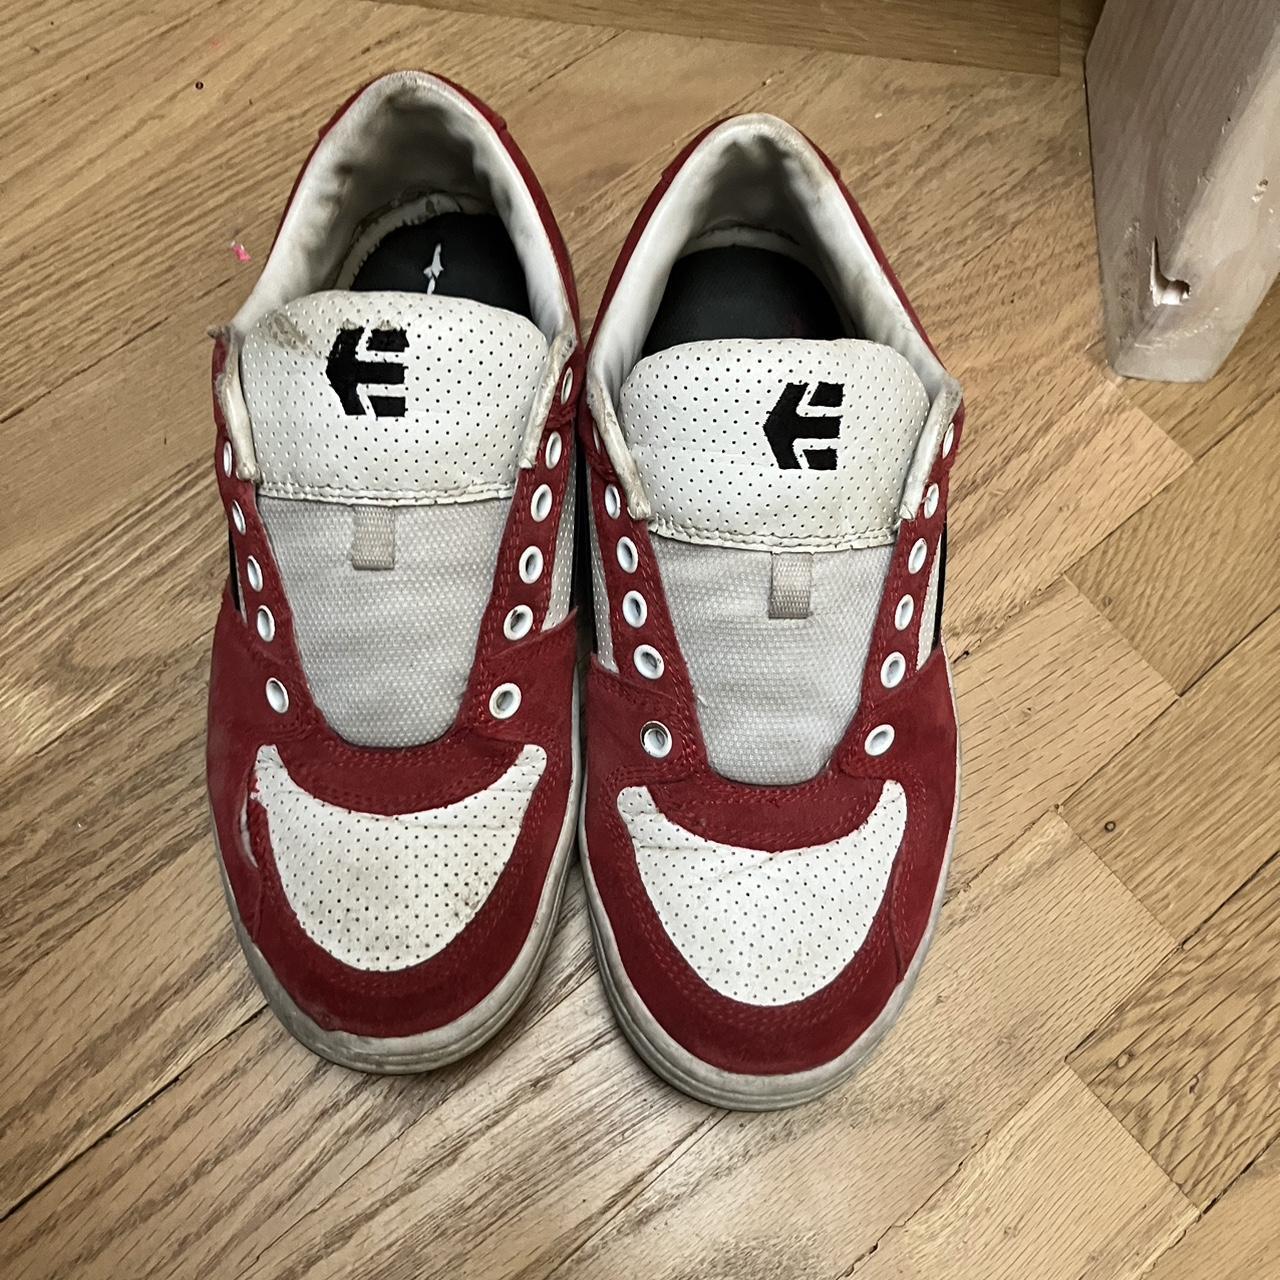 Etnies Men's Red and White Trainers